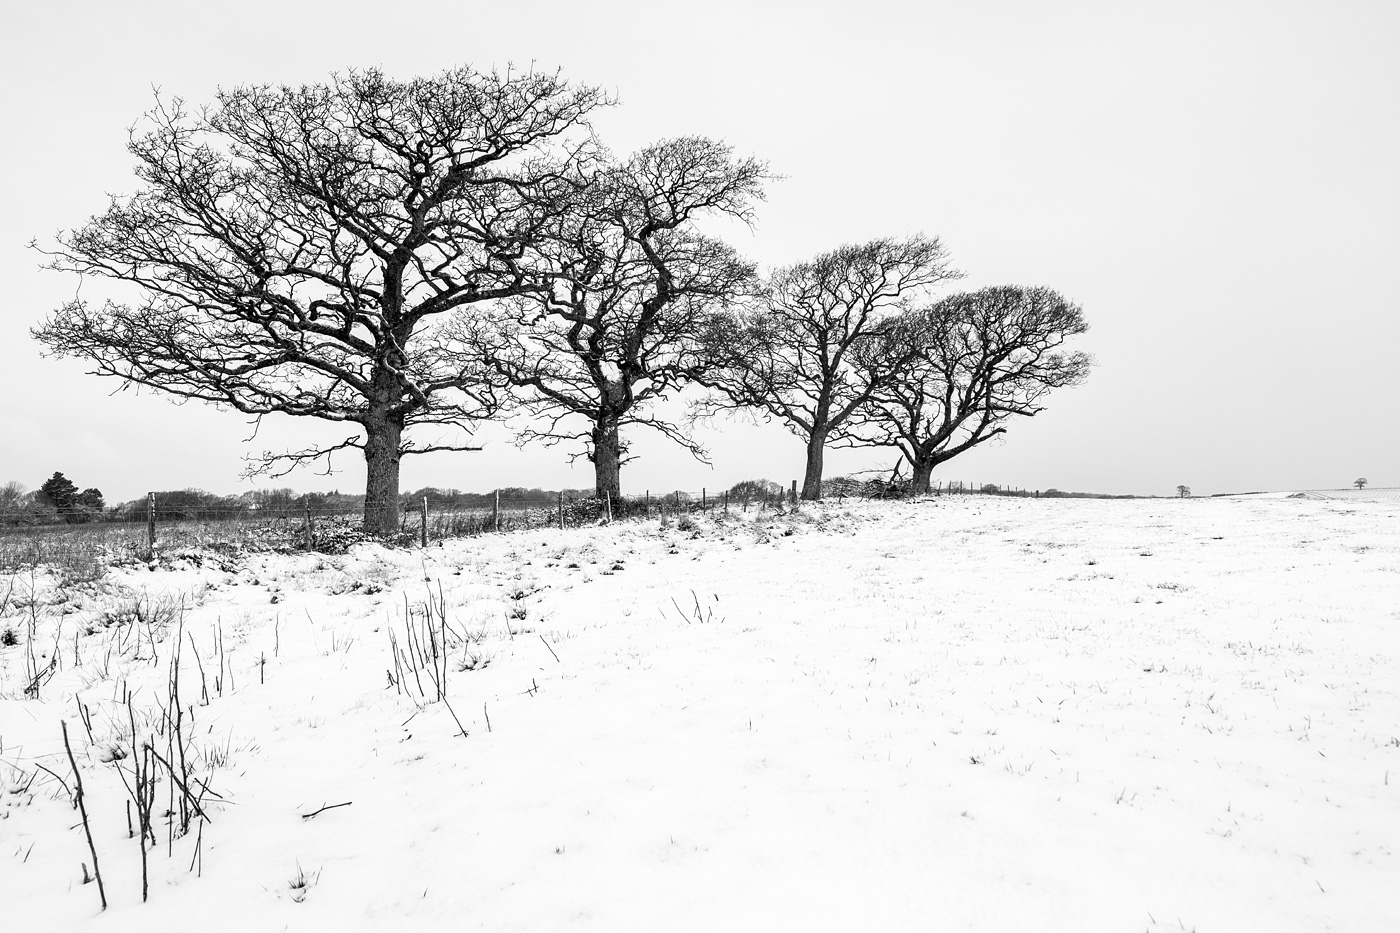 Snow scene with four Oak trees along fence line at edge of field leading lines into distance, Poynings West Sussex UK black and white rural landscape photograph © P. Maton 2018 eyeteeth.net